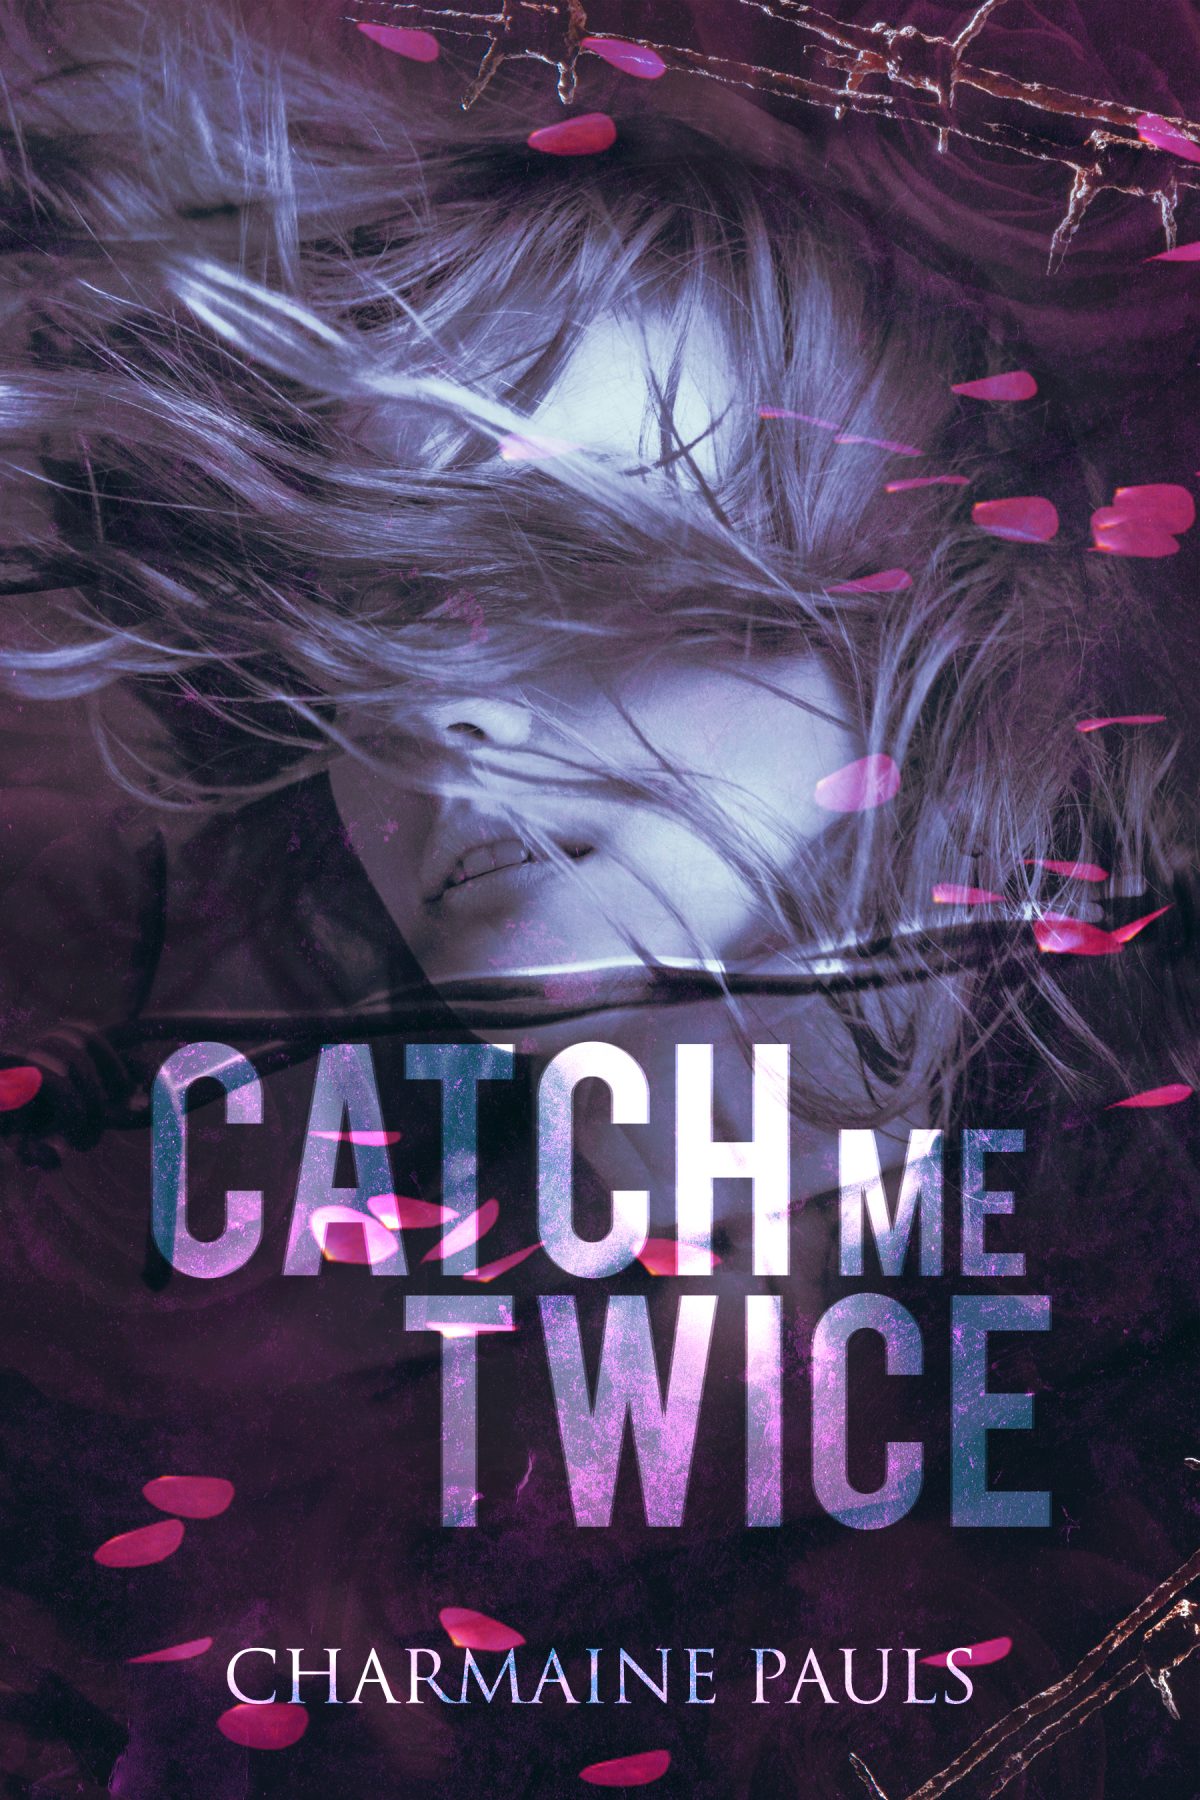 Catch Me Twice, a cheating angst romance